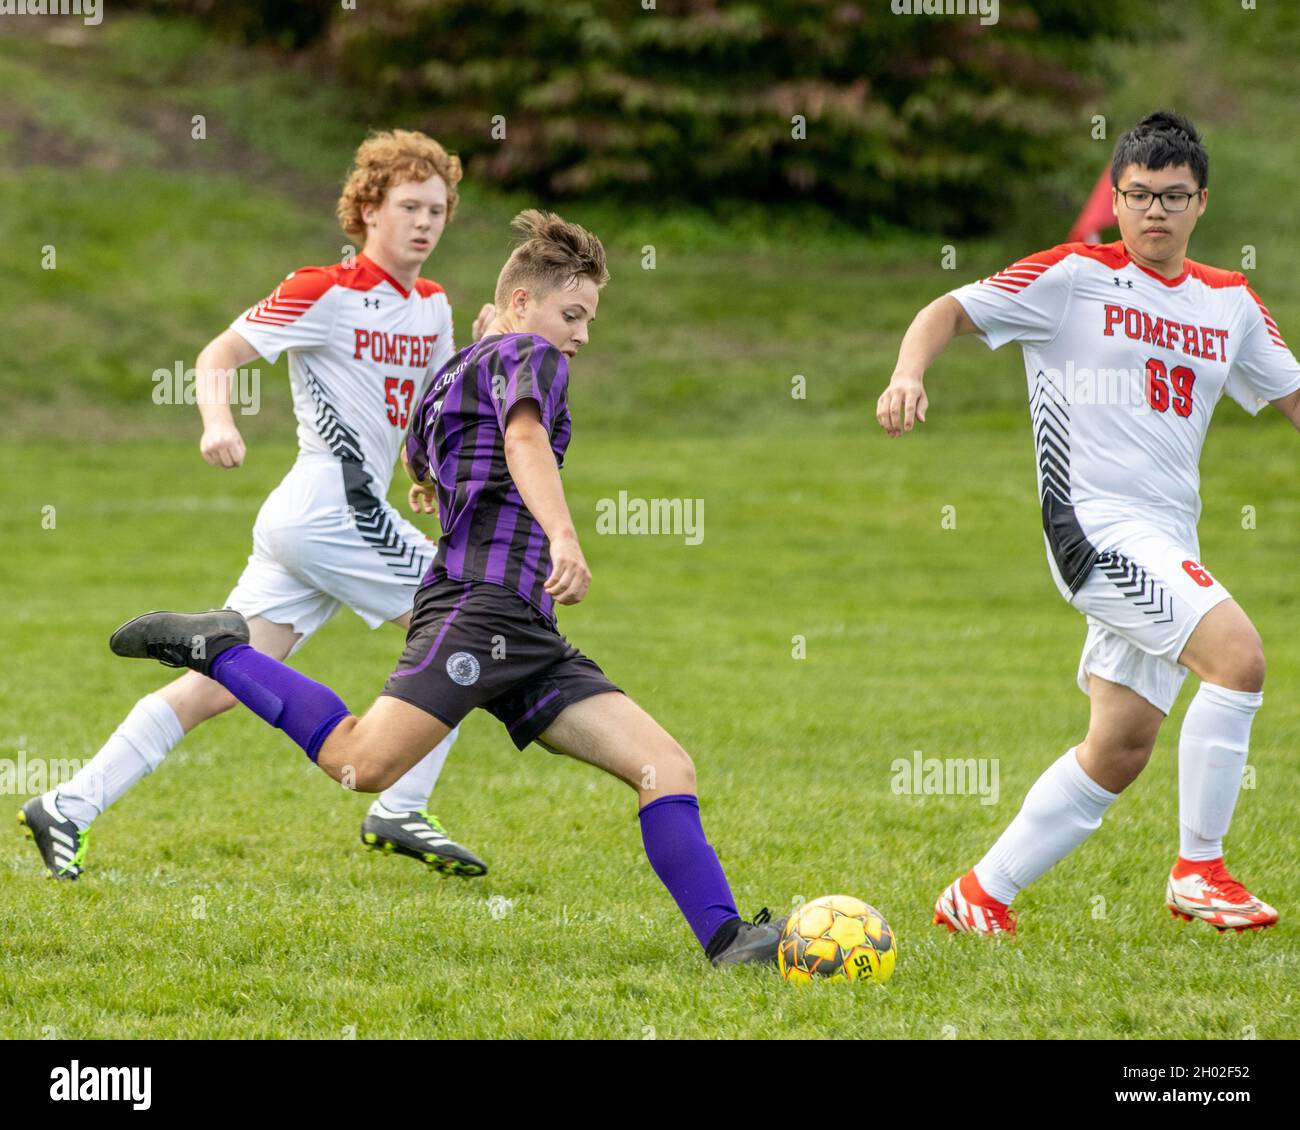 Boys high school soccer game played in Massachusetts Stock Photo